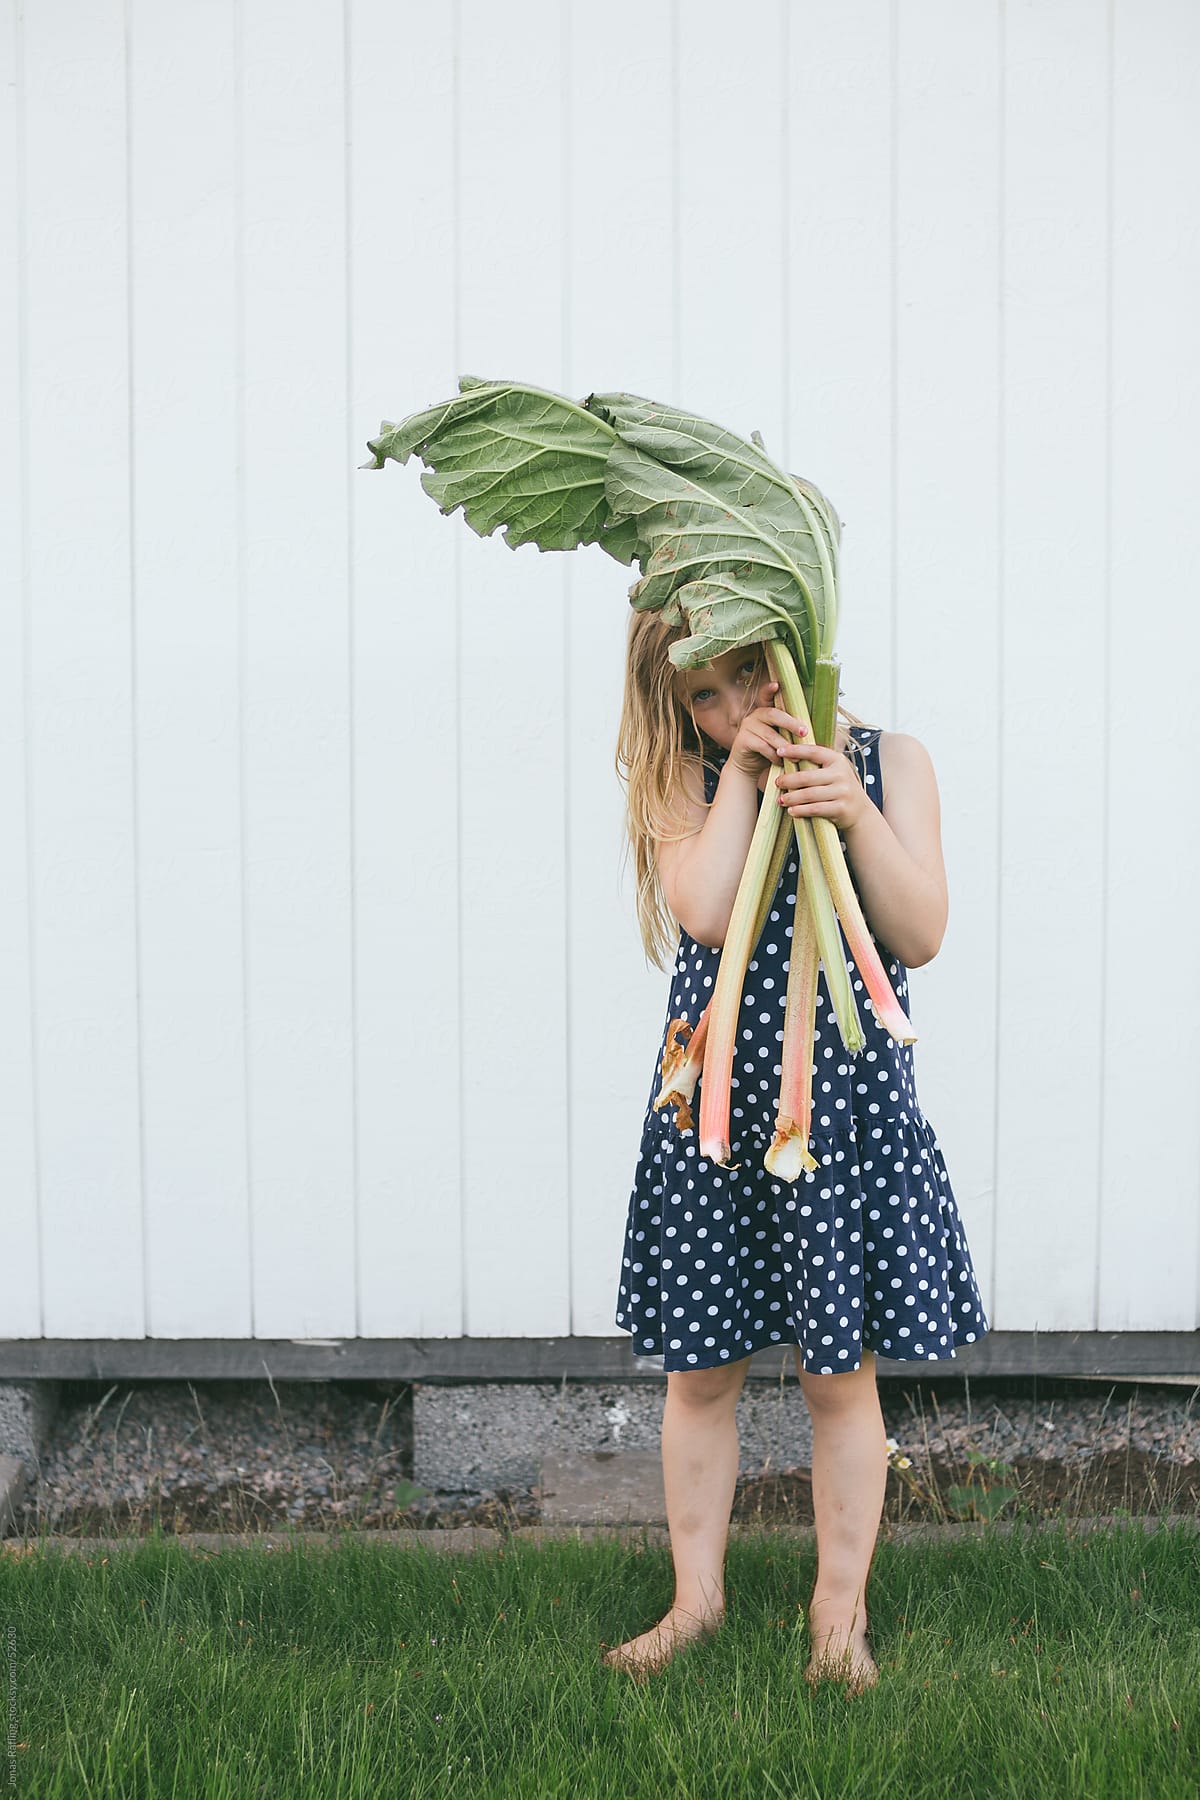 Barefoot Girl In Dotted Dress Holding Rhubarb In Her Hands By Stocksy Contributor Jonas